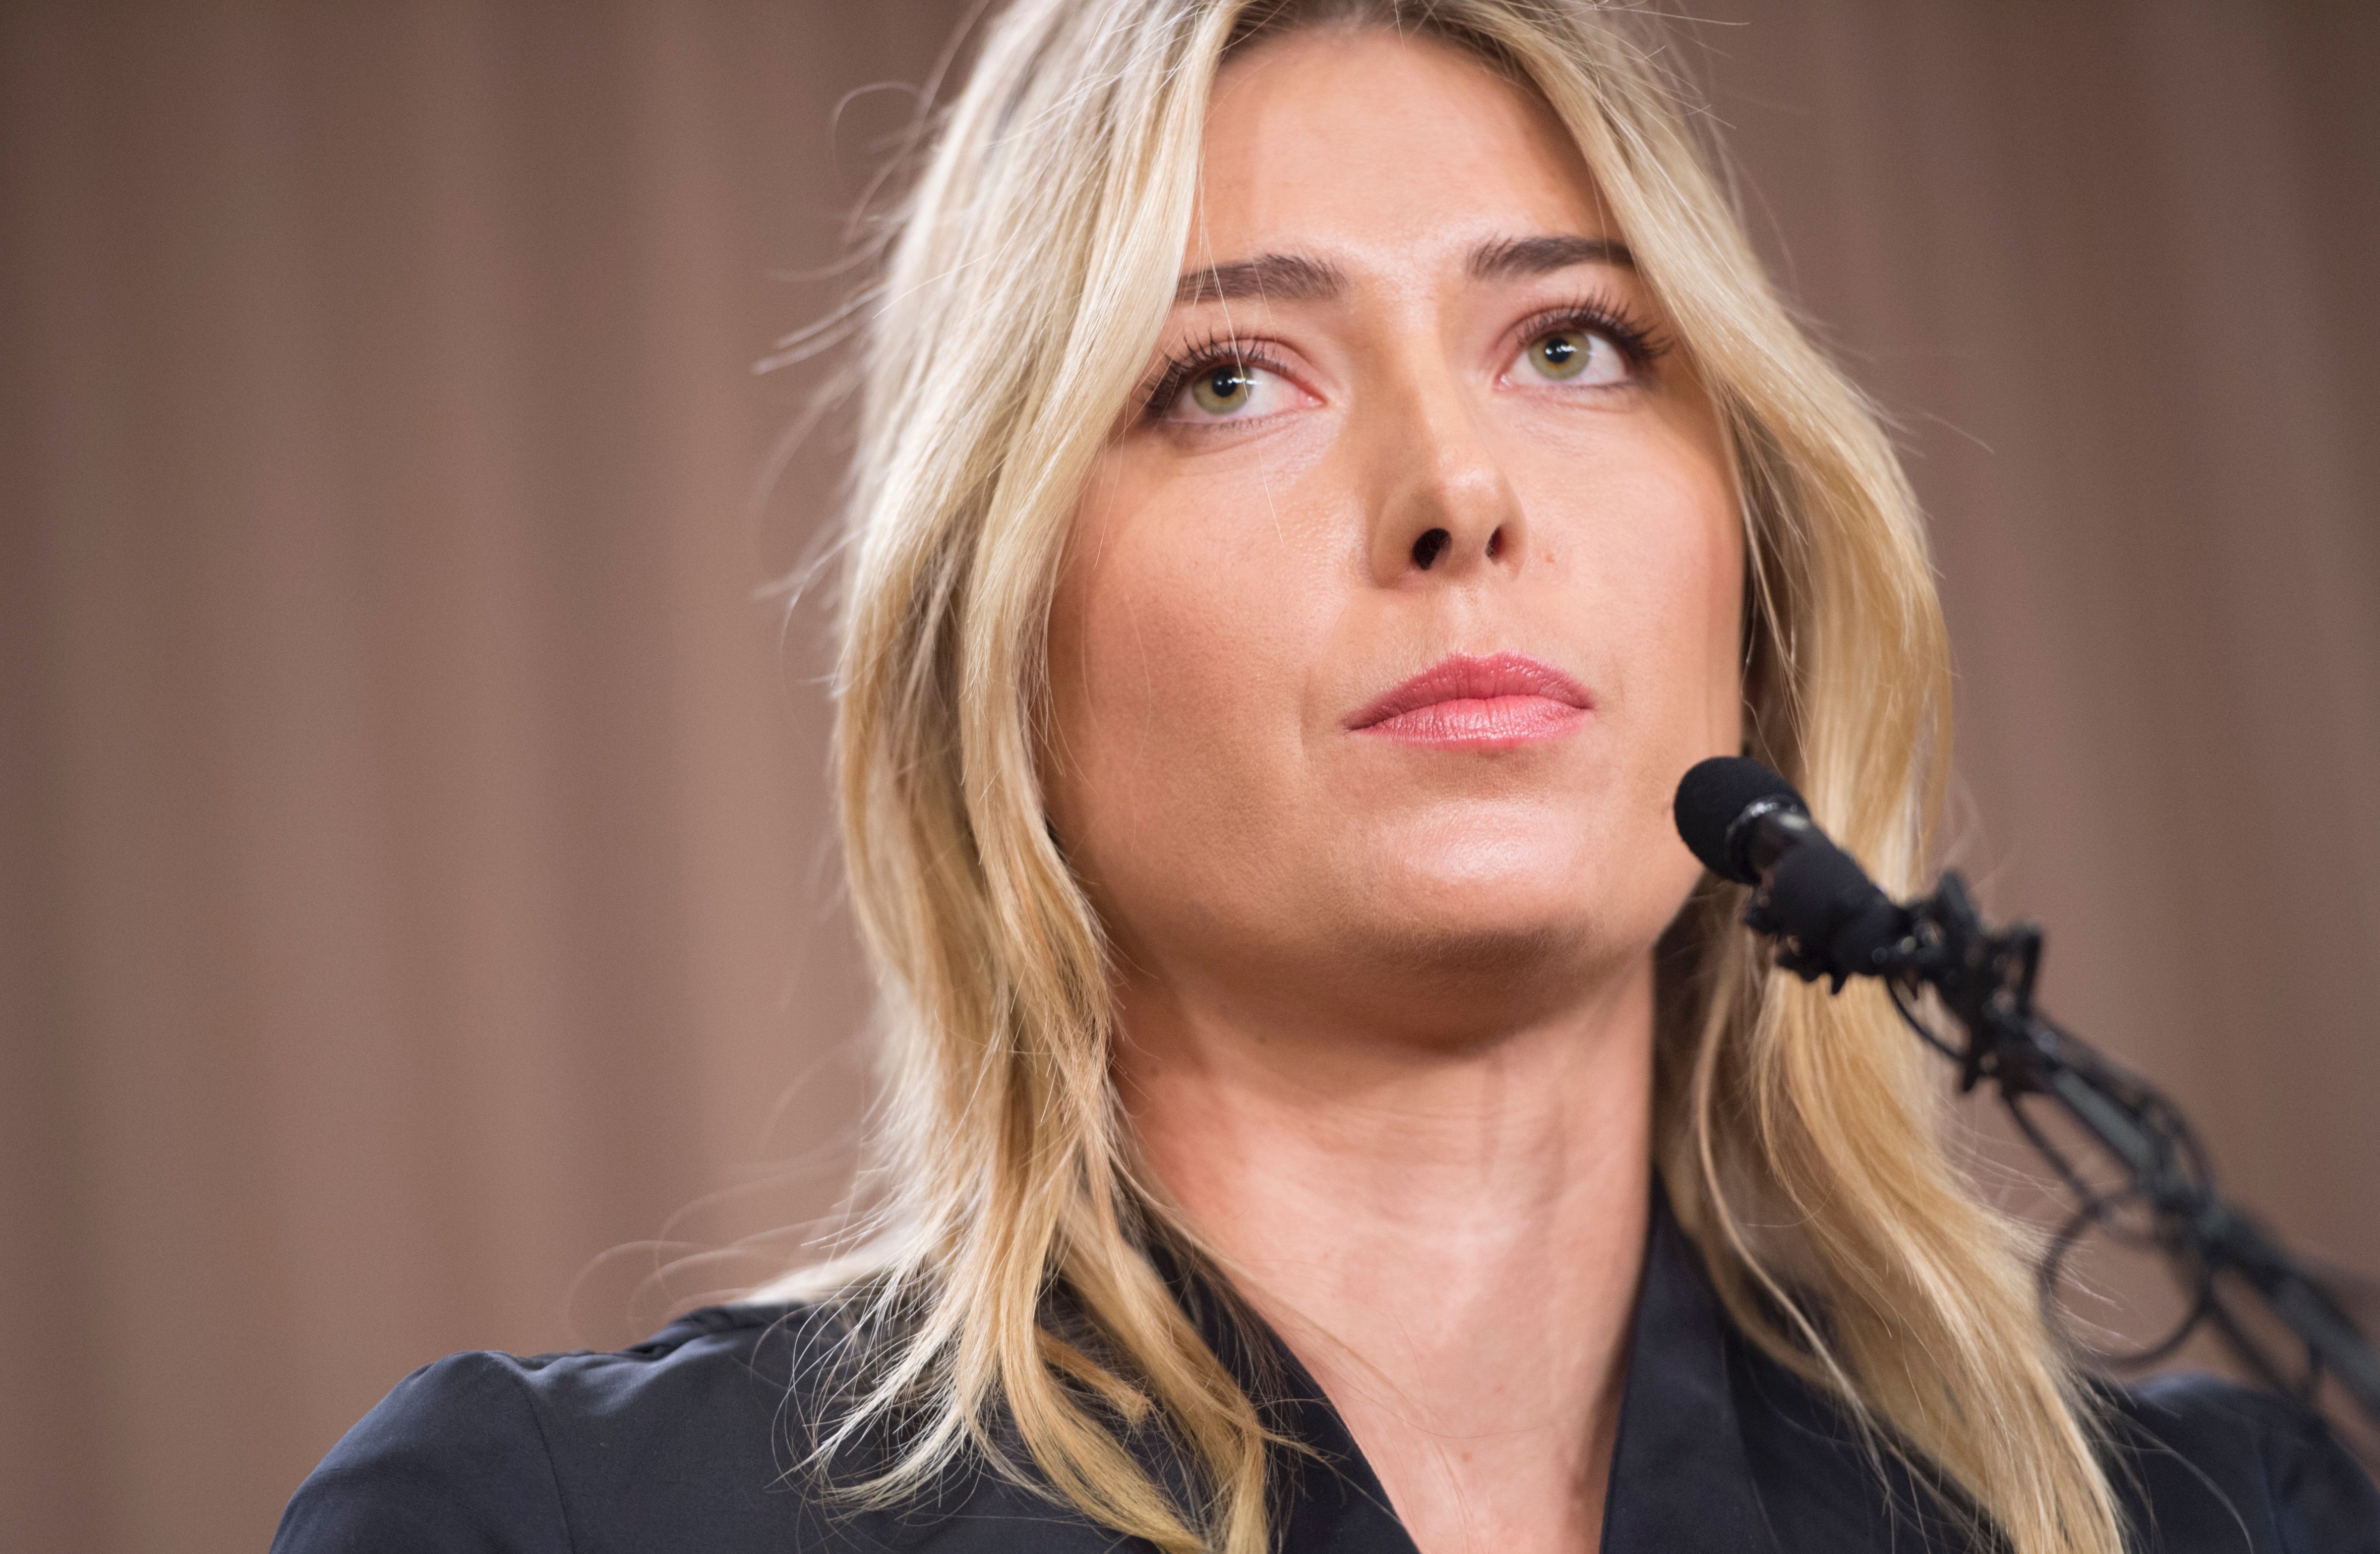 Russian tennis player Maria Sharapova speaks at a press conference in Los Angeles, on March 7, 2016. (Robyn Beck—AFP/Getty Images)